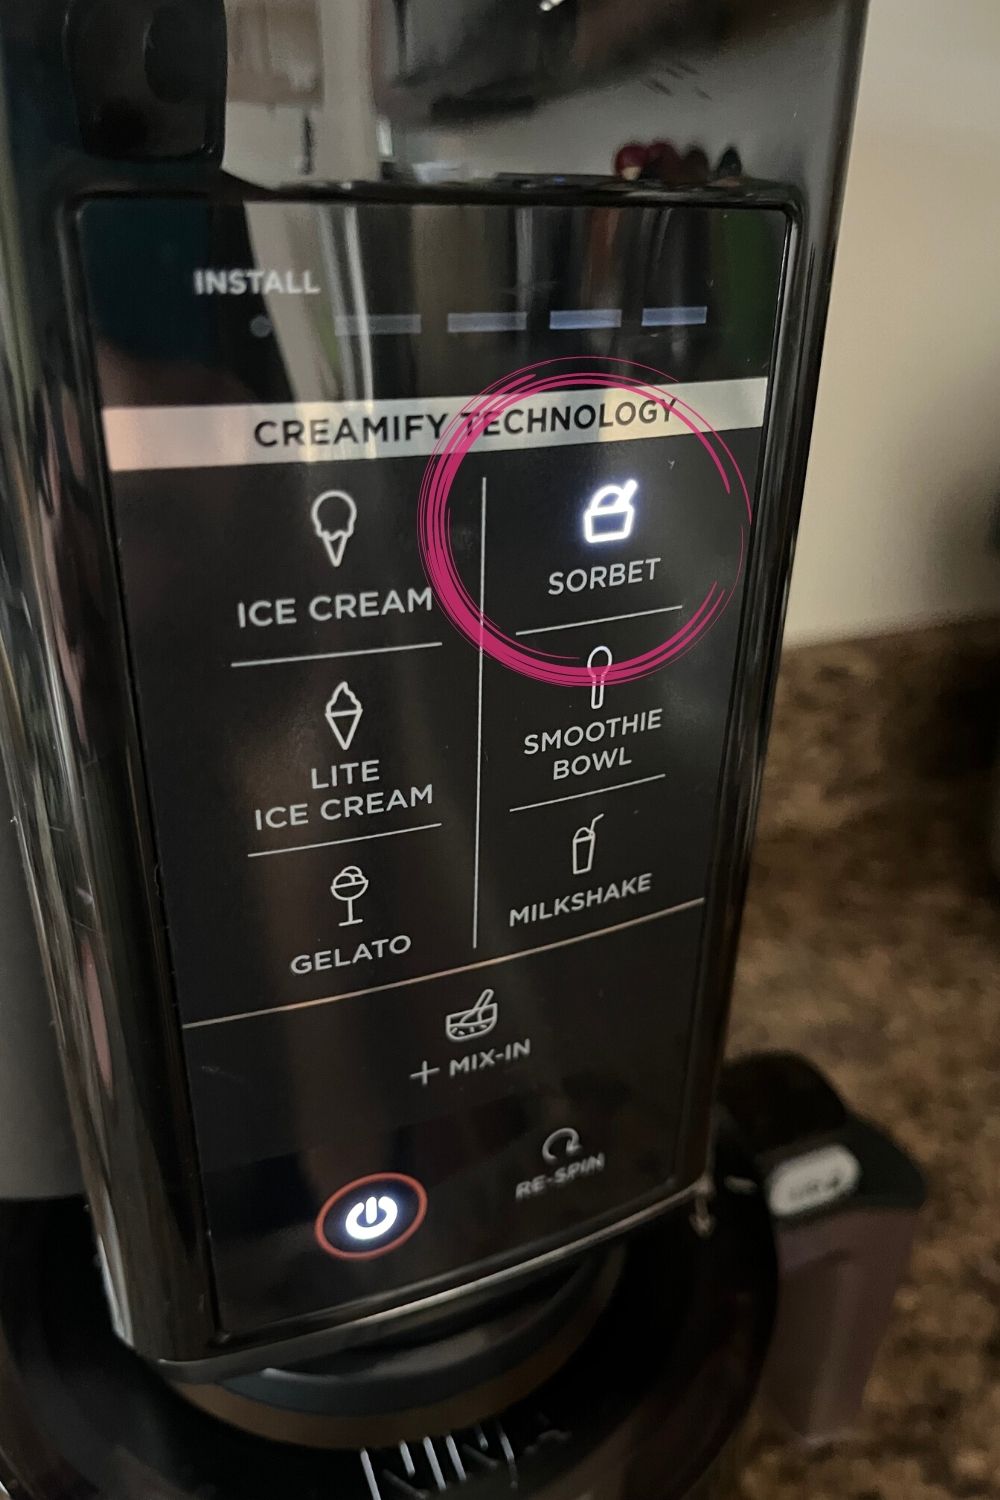 control panel of the ninja creami ice cream maker, with the sorbet button circled